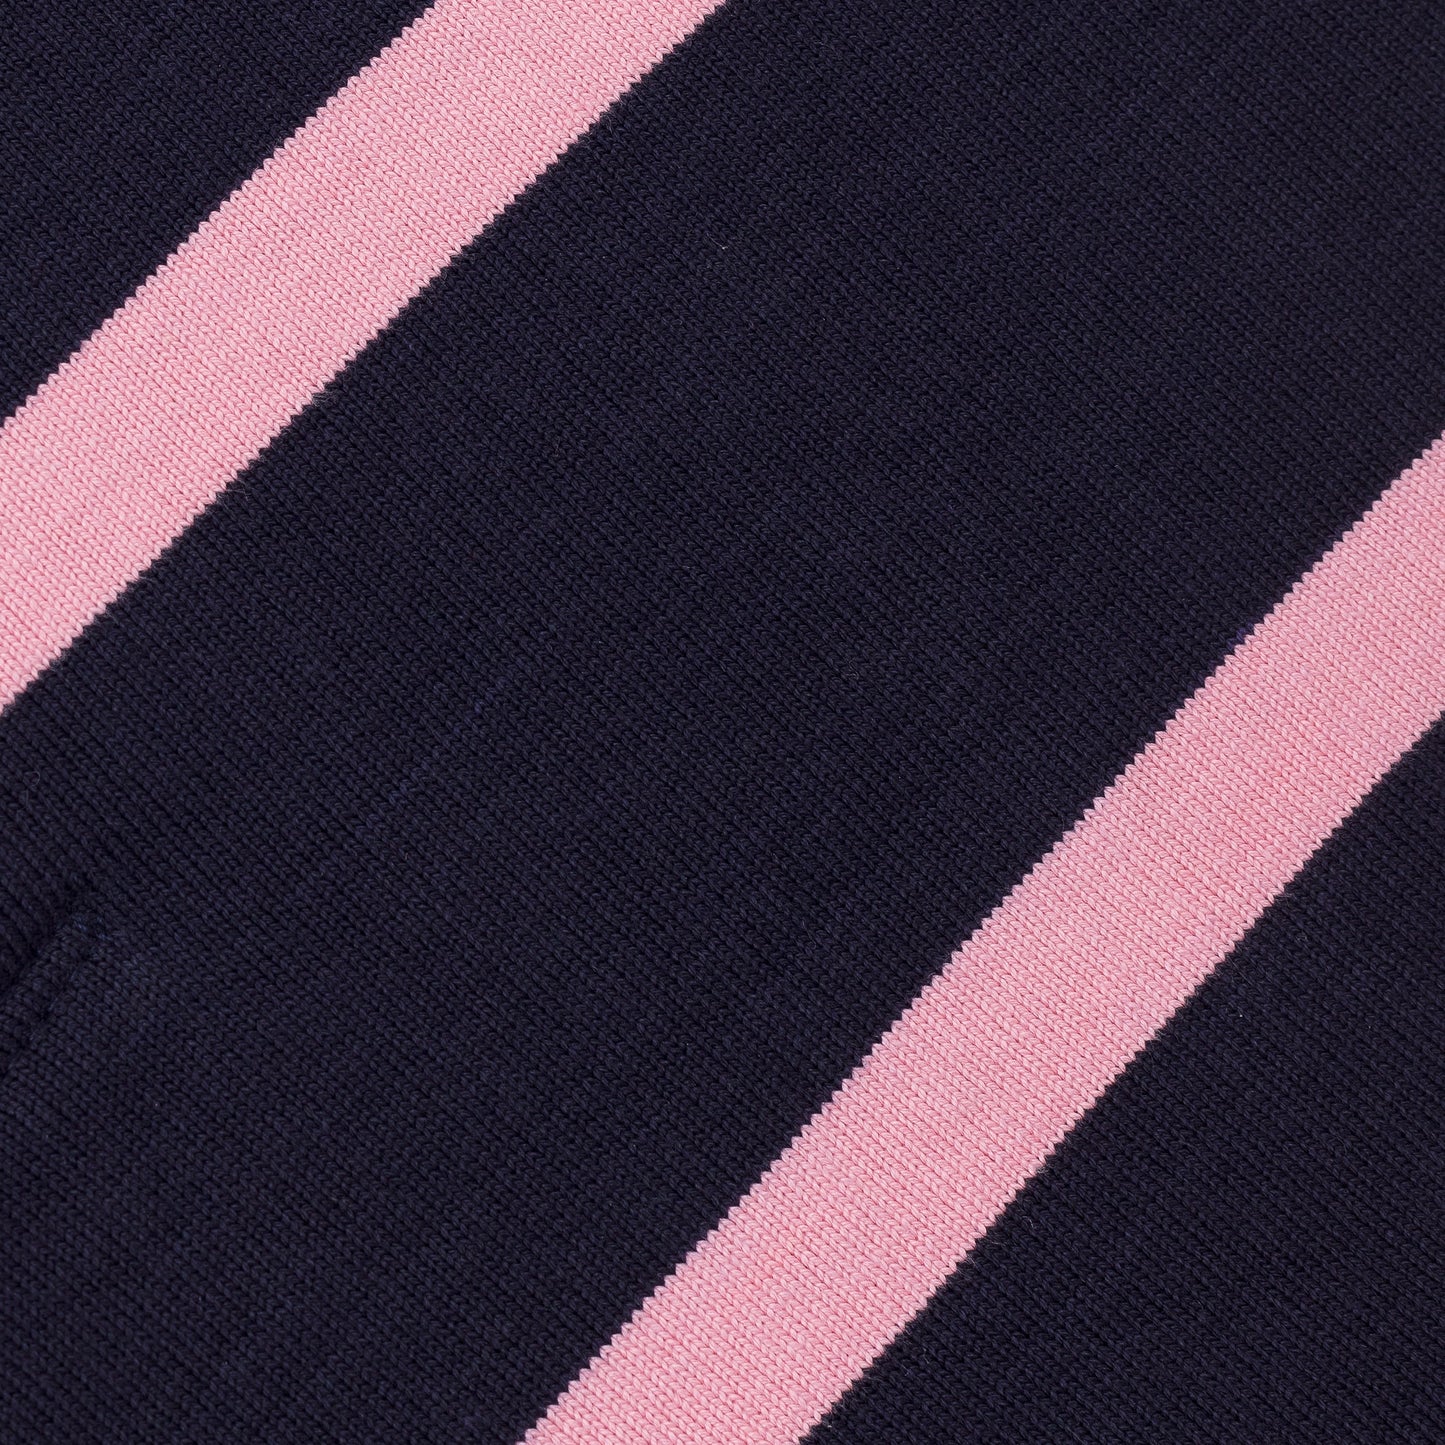 Navy and pink stripes.